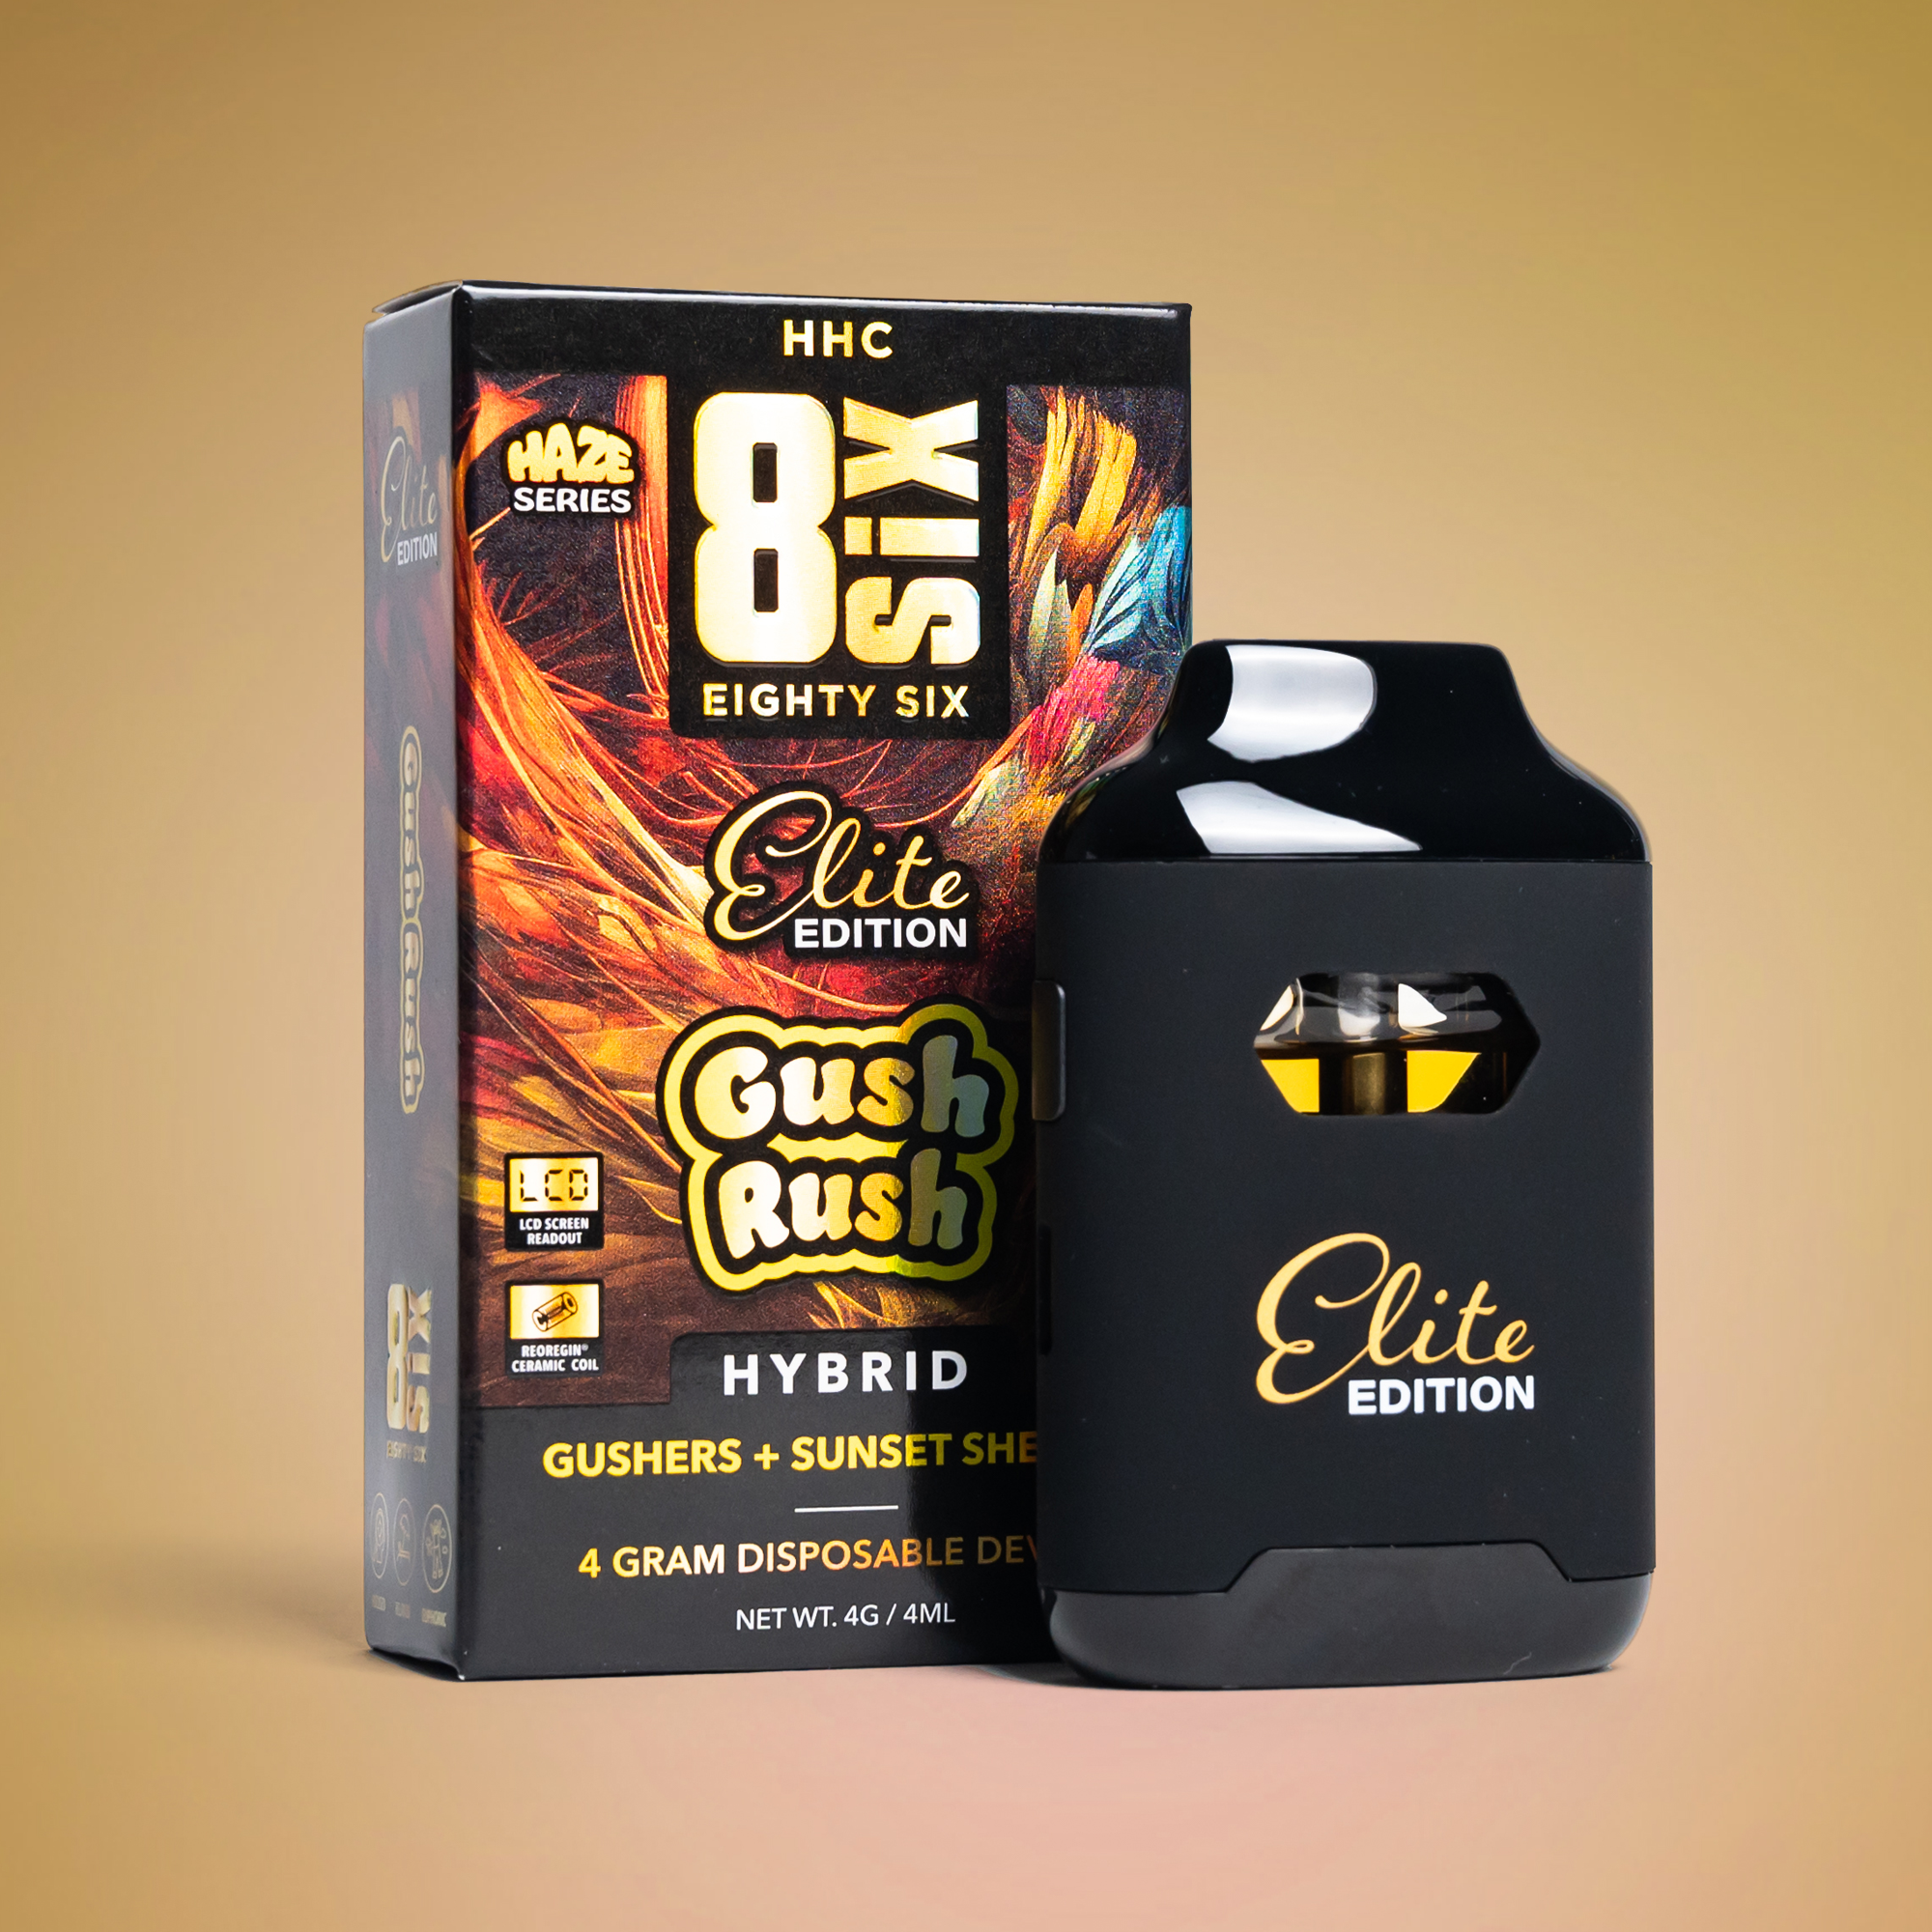 Eighty Six Gush Rush Elite Edition HHC 4G Disposable (Gushers) Best Price